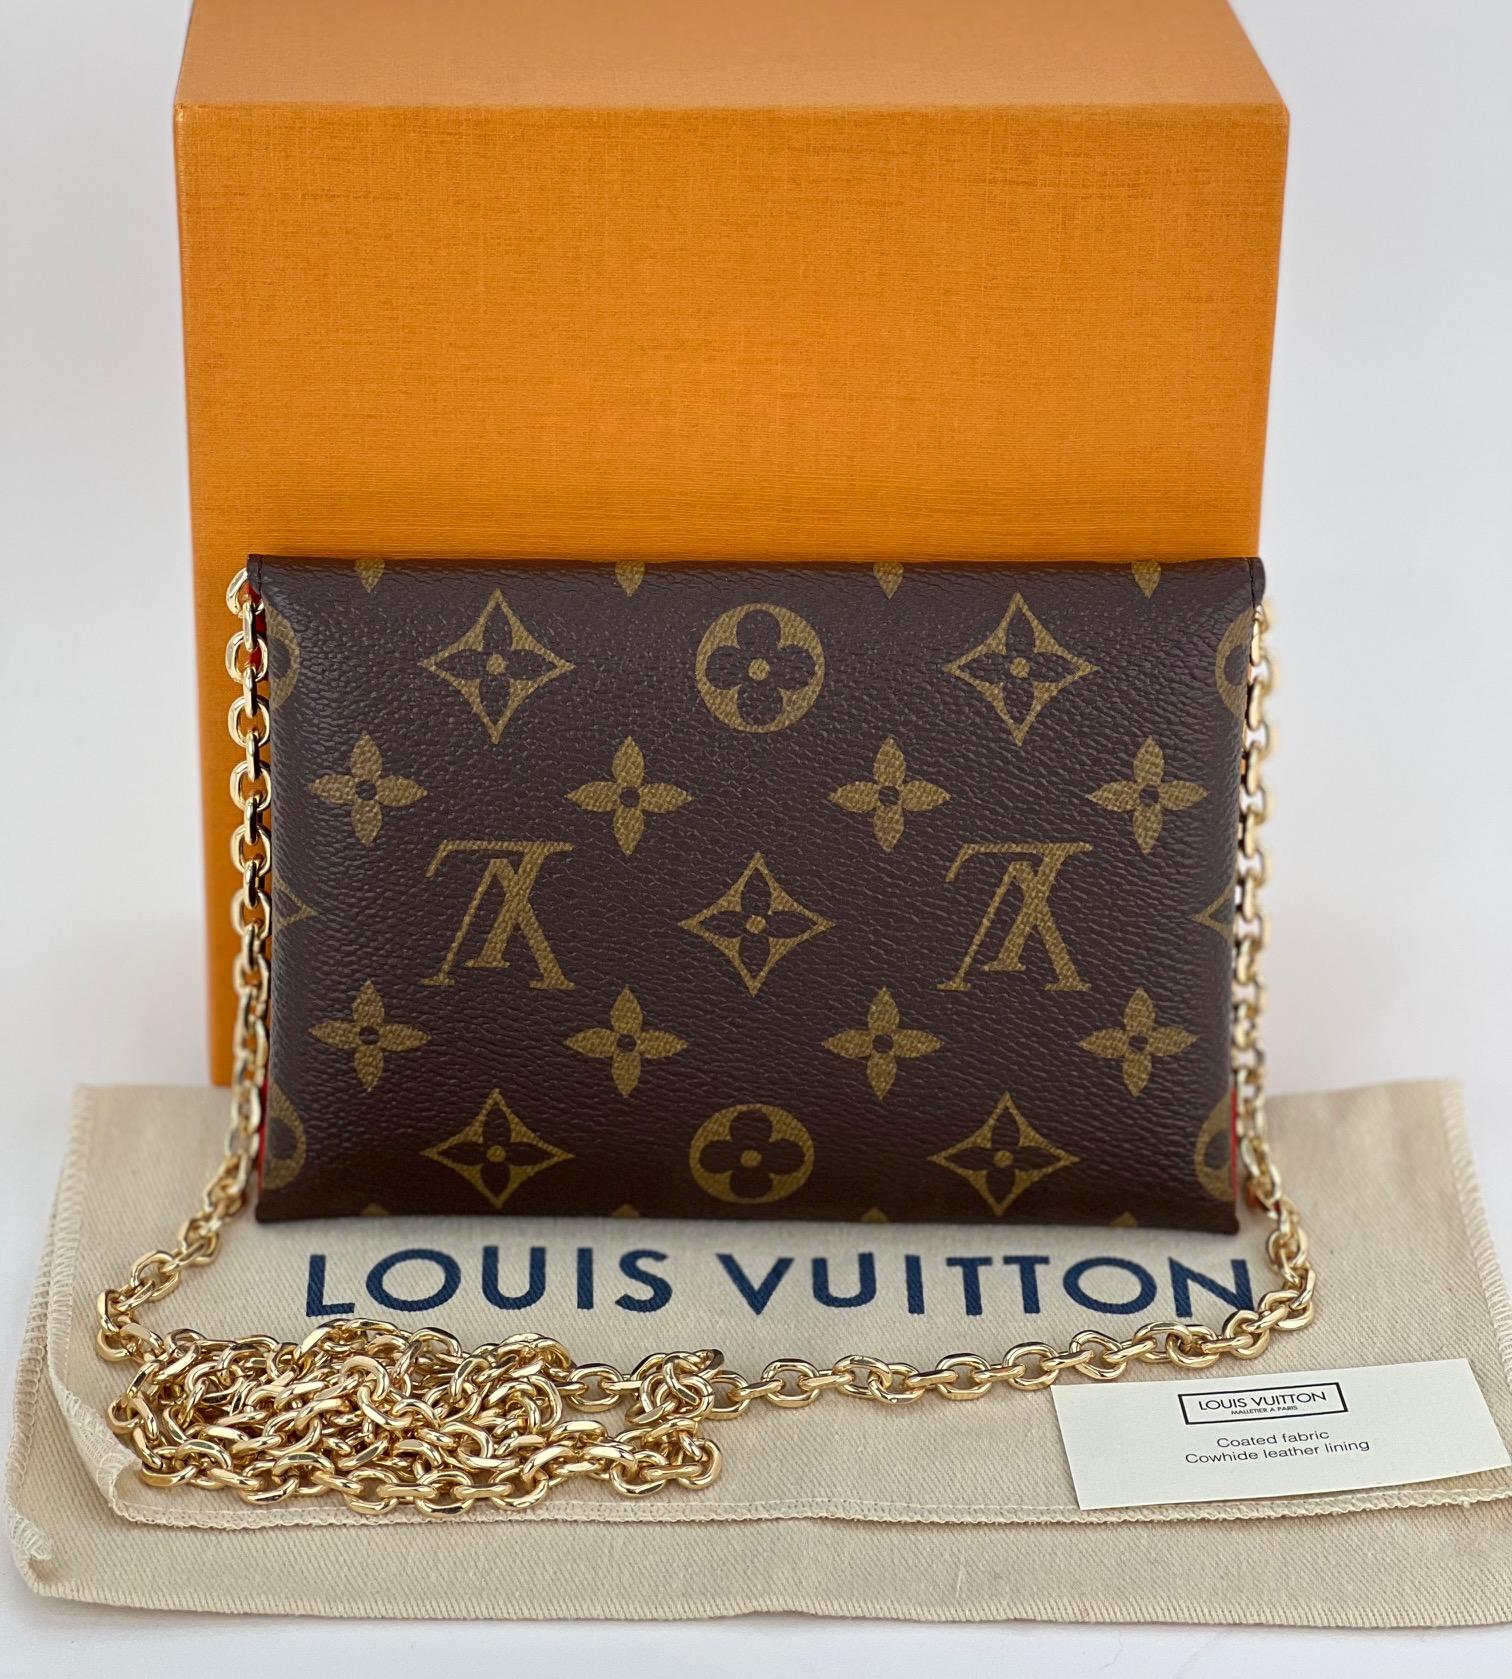 Preowned BUT like New 100% Authentic
LOUIS VUITTON Kirigami Pochette Red Medium
W/Added Non LV Insert & Chain to make a Crossbody
PLEASE NOTE SIZE: this is medium but still small
RATING: A+...Excellent, near mint
MATERIAL: Monogram canvas, leather